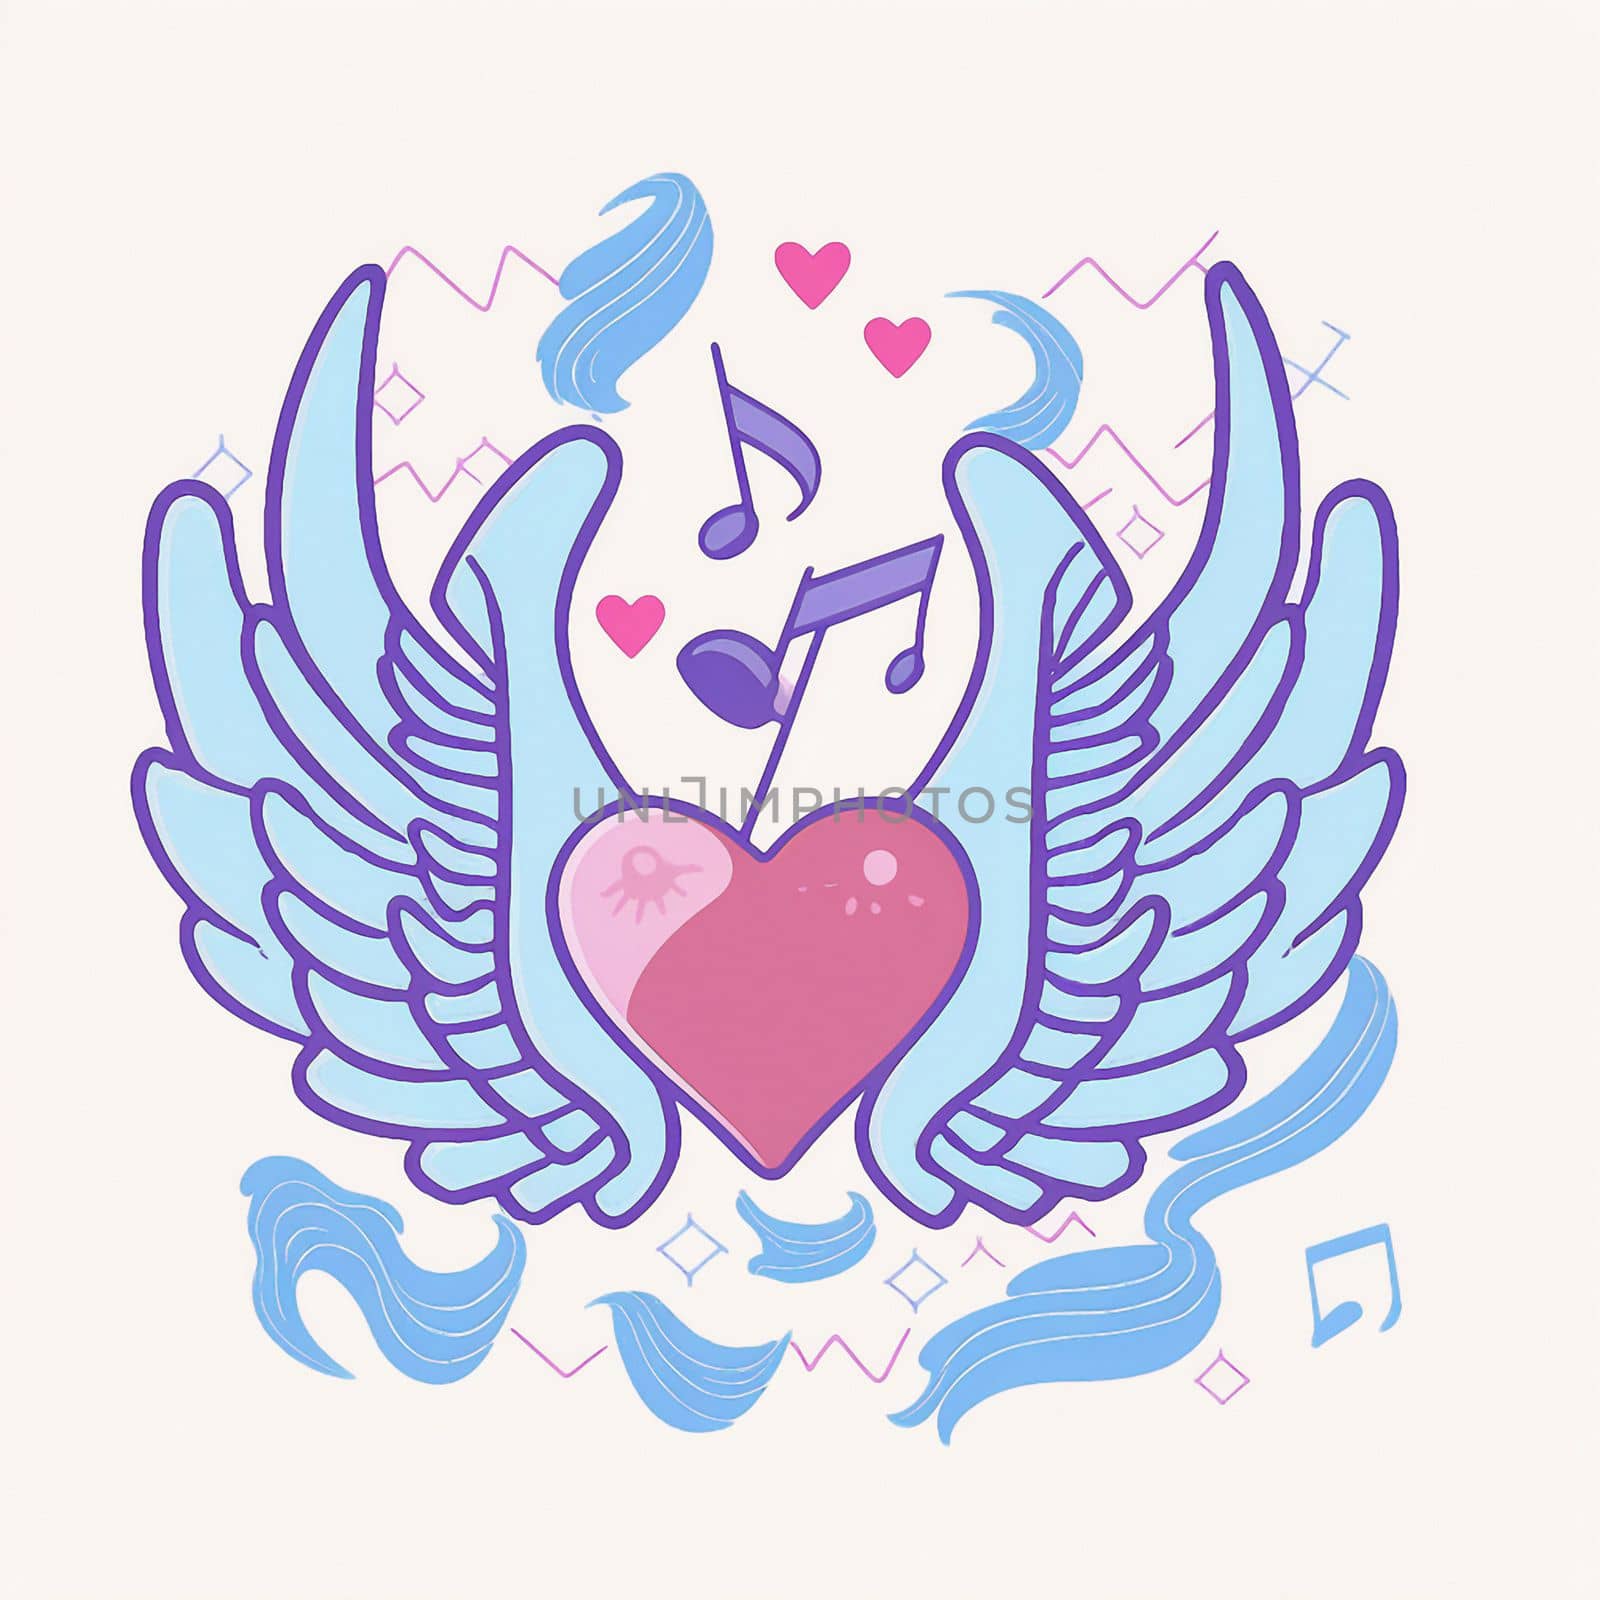 Cartoon graphic drawing of a singing heart with wings by NeuroSky